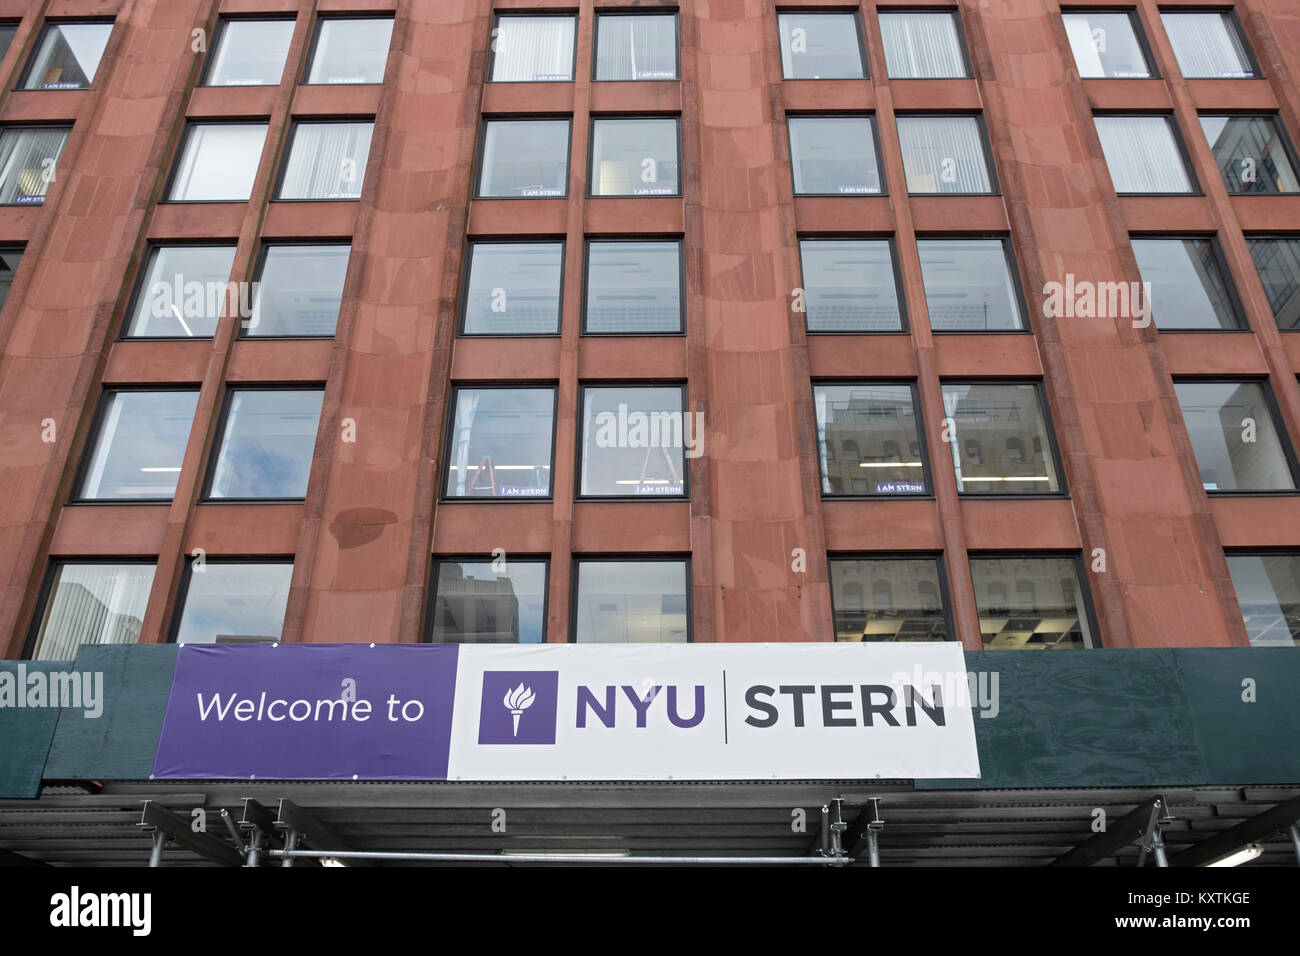 The exterior of NYU Stern College Business School on West 4th Street in Greenwich Village, Manhattan, New York City. Stock Photo